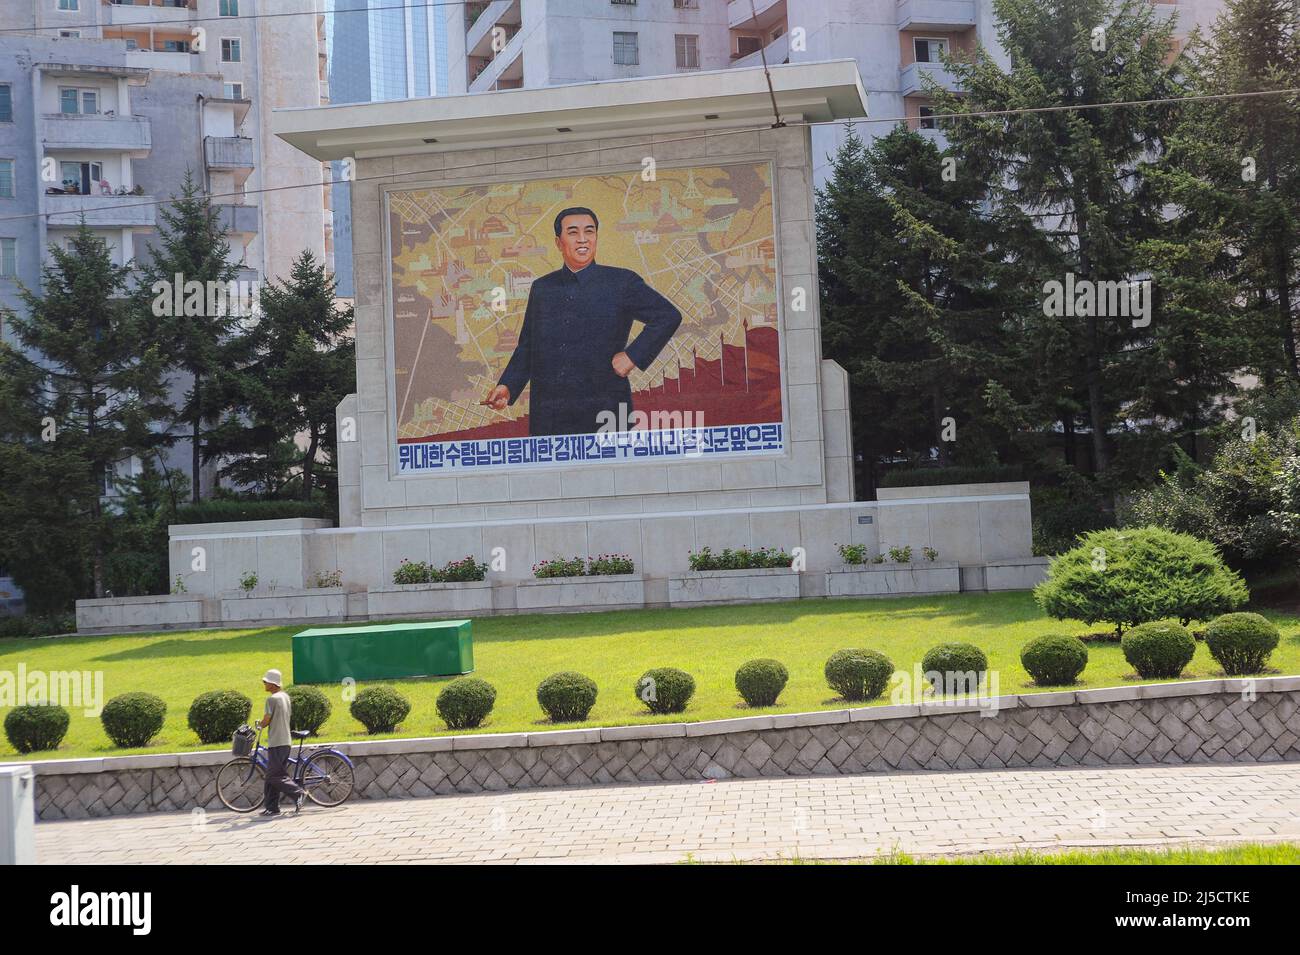 08.08.2012, Pjoengjang, North Korea, Asia - A daily street scene shows a memorial plaque with the portrait of Kim Il-sung and residential houses in the background. The personality cult around the two former leaders is still omnipresent and their pictures and statues appear all over the country. [automated translation] Stock Photo